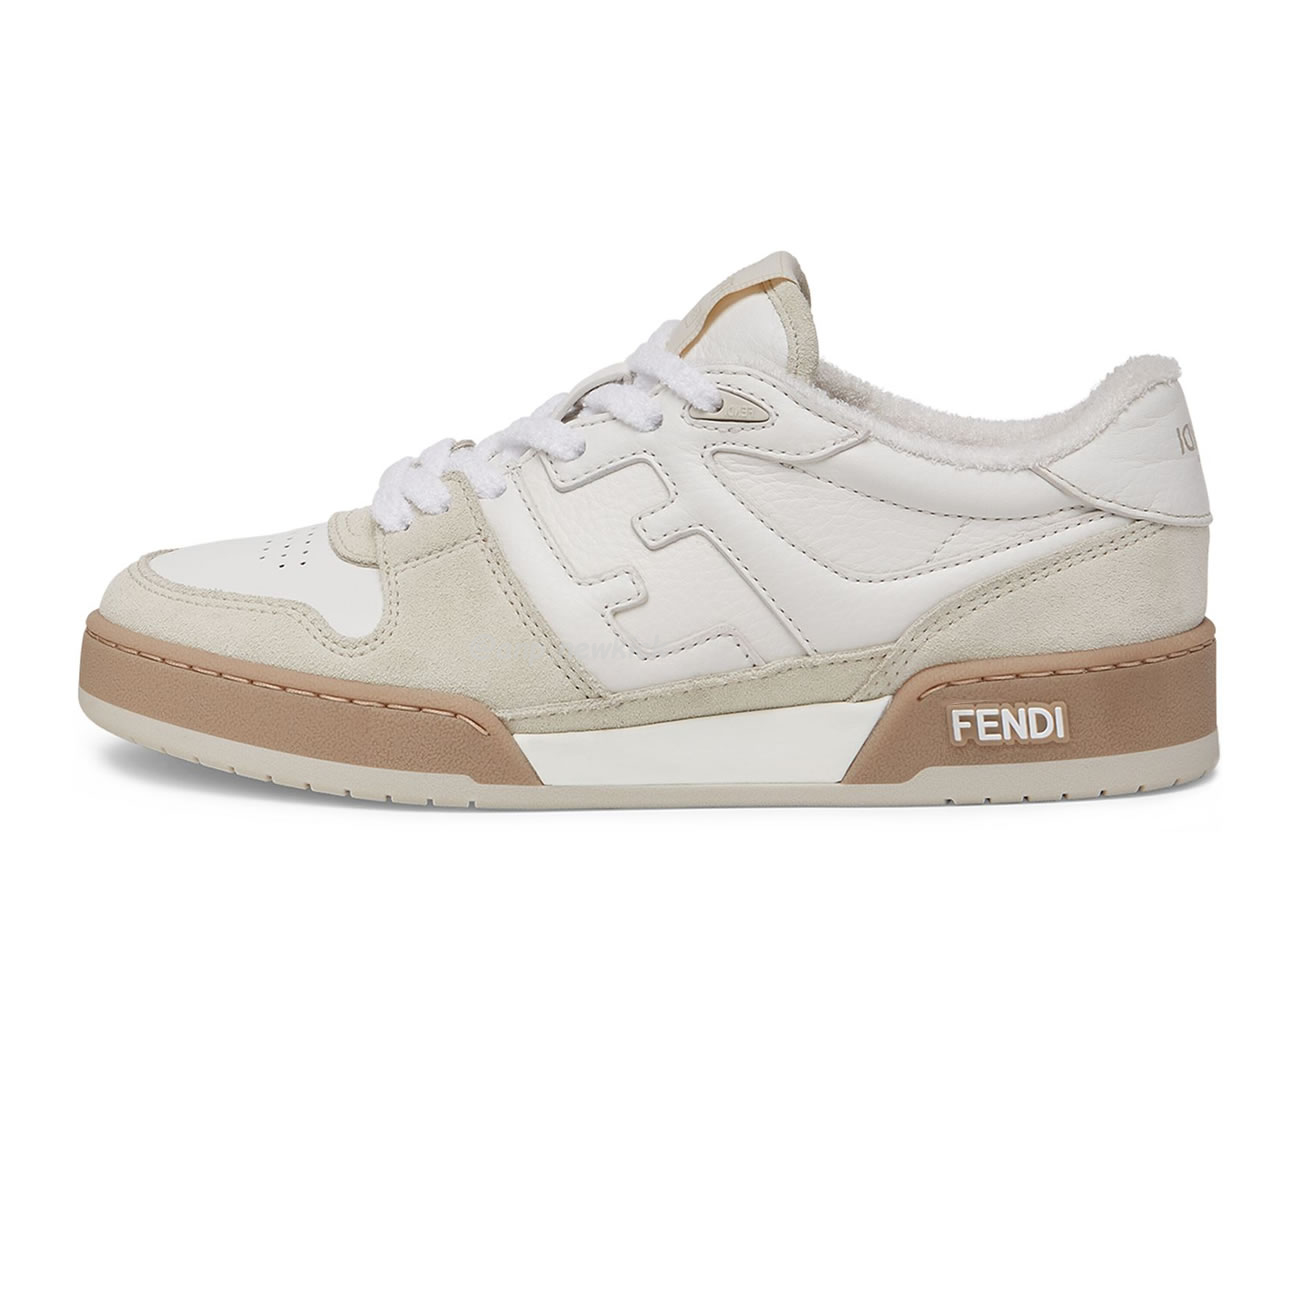 Fendi Match Cream Black White Suede And Leather Low Top Sneakers (14) - newkick.org